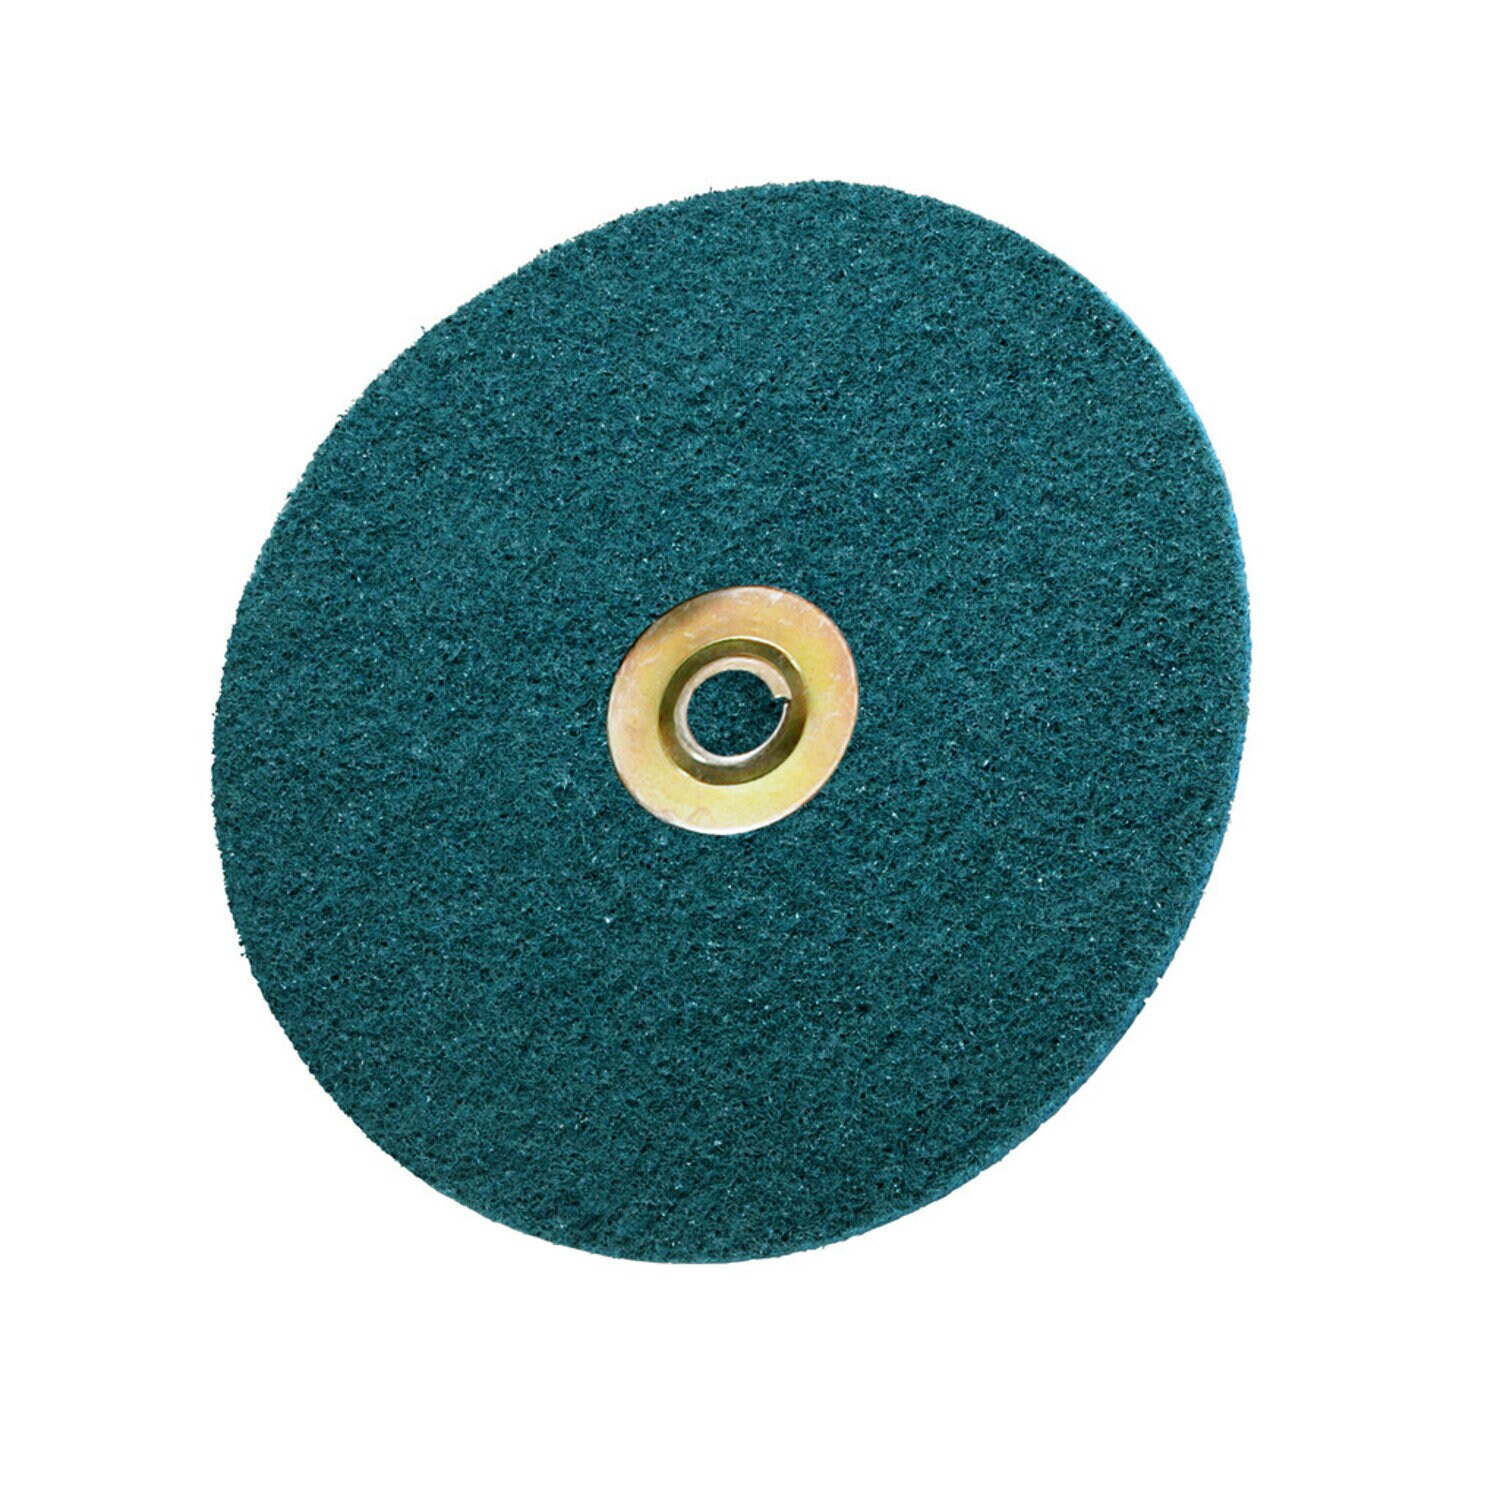 7000120960 - Scotch-Brite Surface Conditioning TN Quick Change Disc, SC-DN, A/O Very
Fine, 7 in, 25 ea/Case